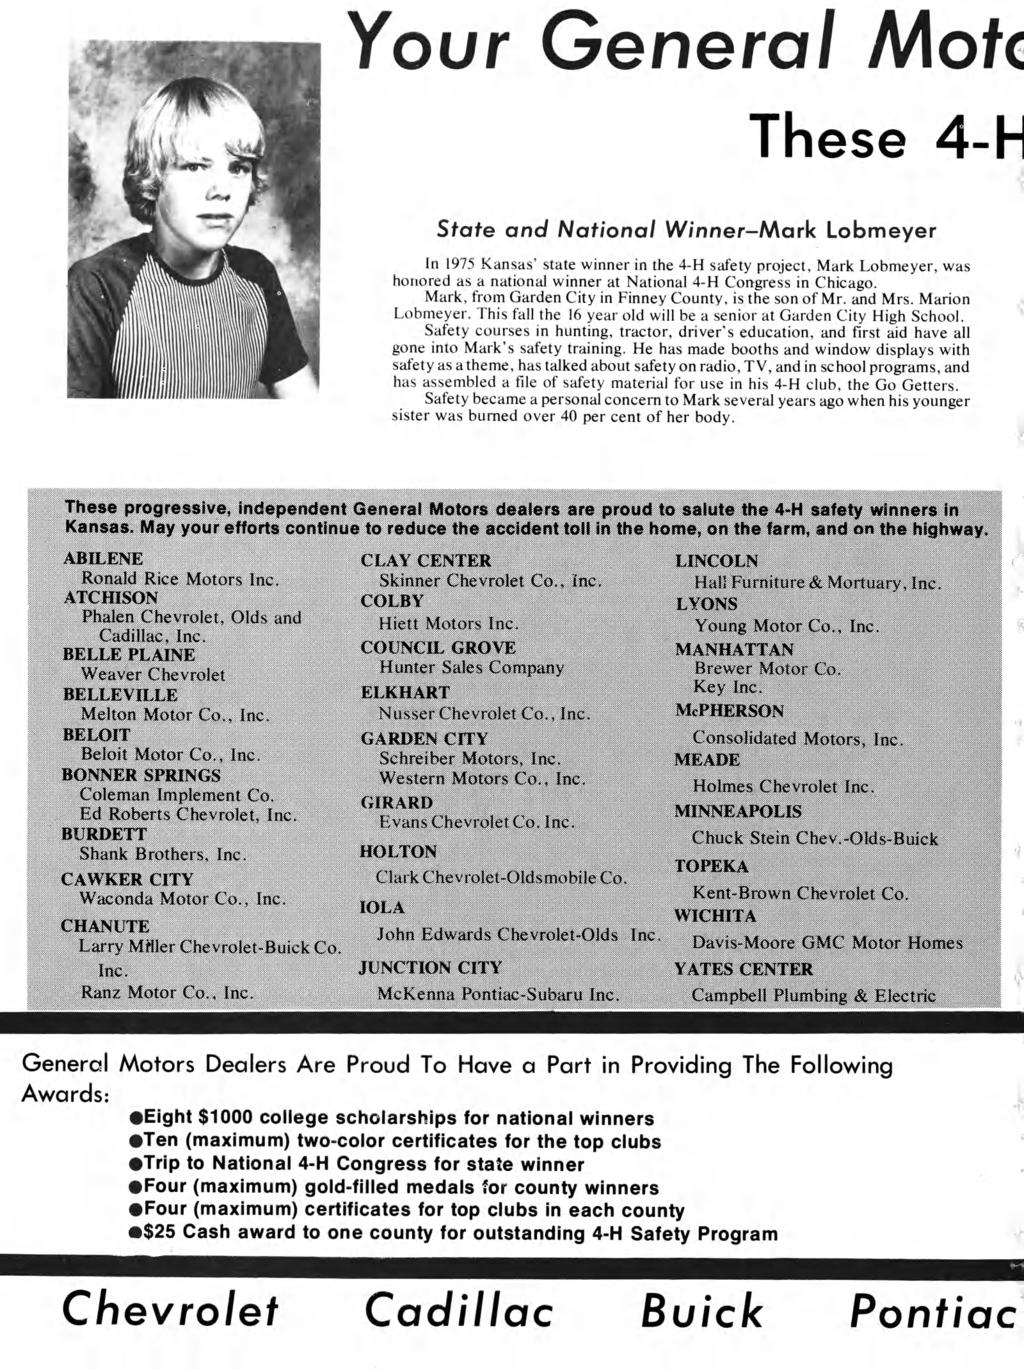 Your General Motc These 4-H State and National Winner-Mark Lobmeyer In 1975 Kansas' state winner in the 4-H safety project, Mark Lobmeyer, was honored as a national winner at National 4-H Congress in